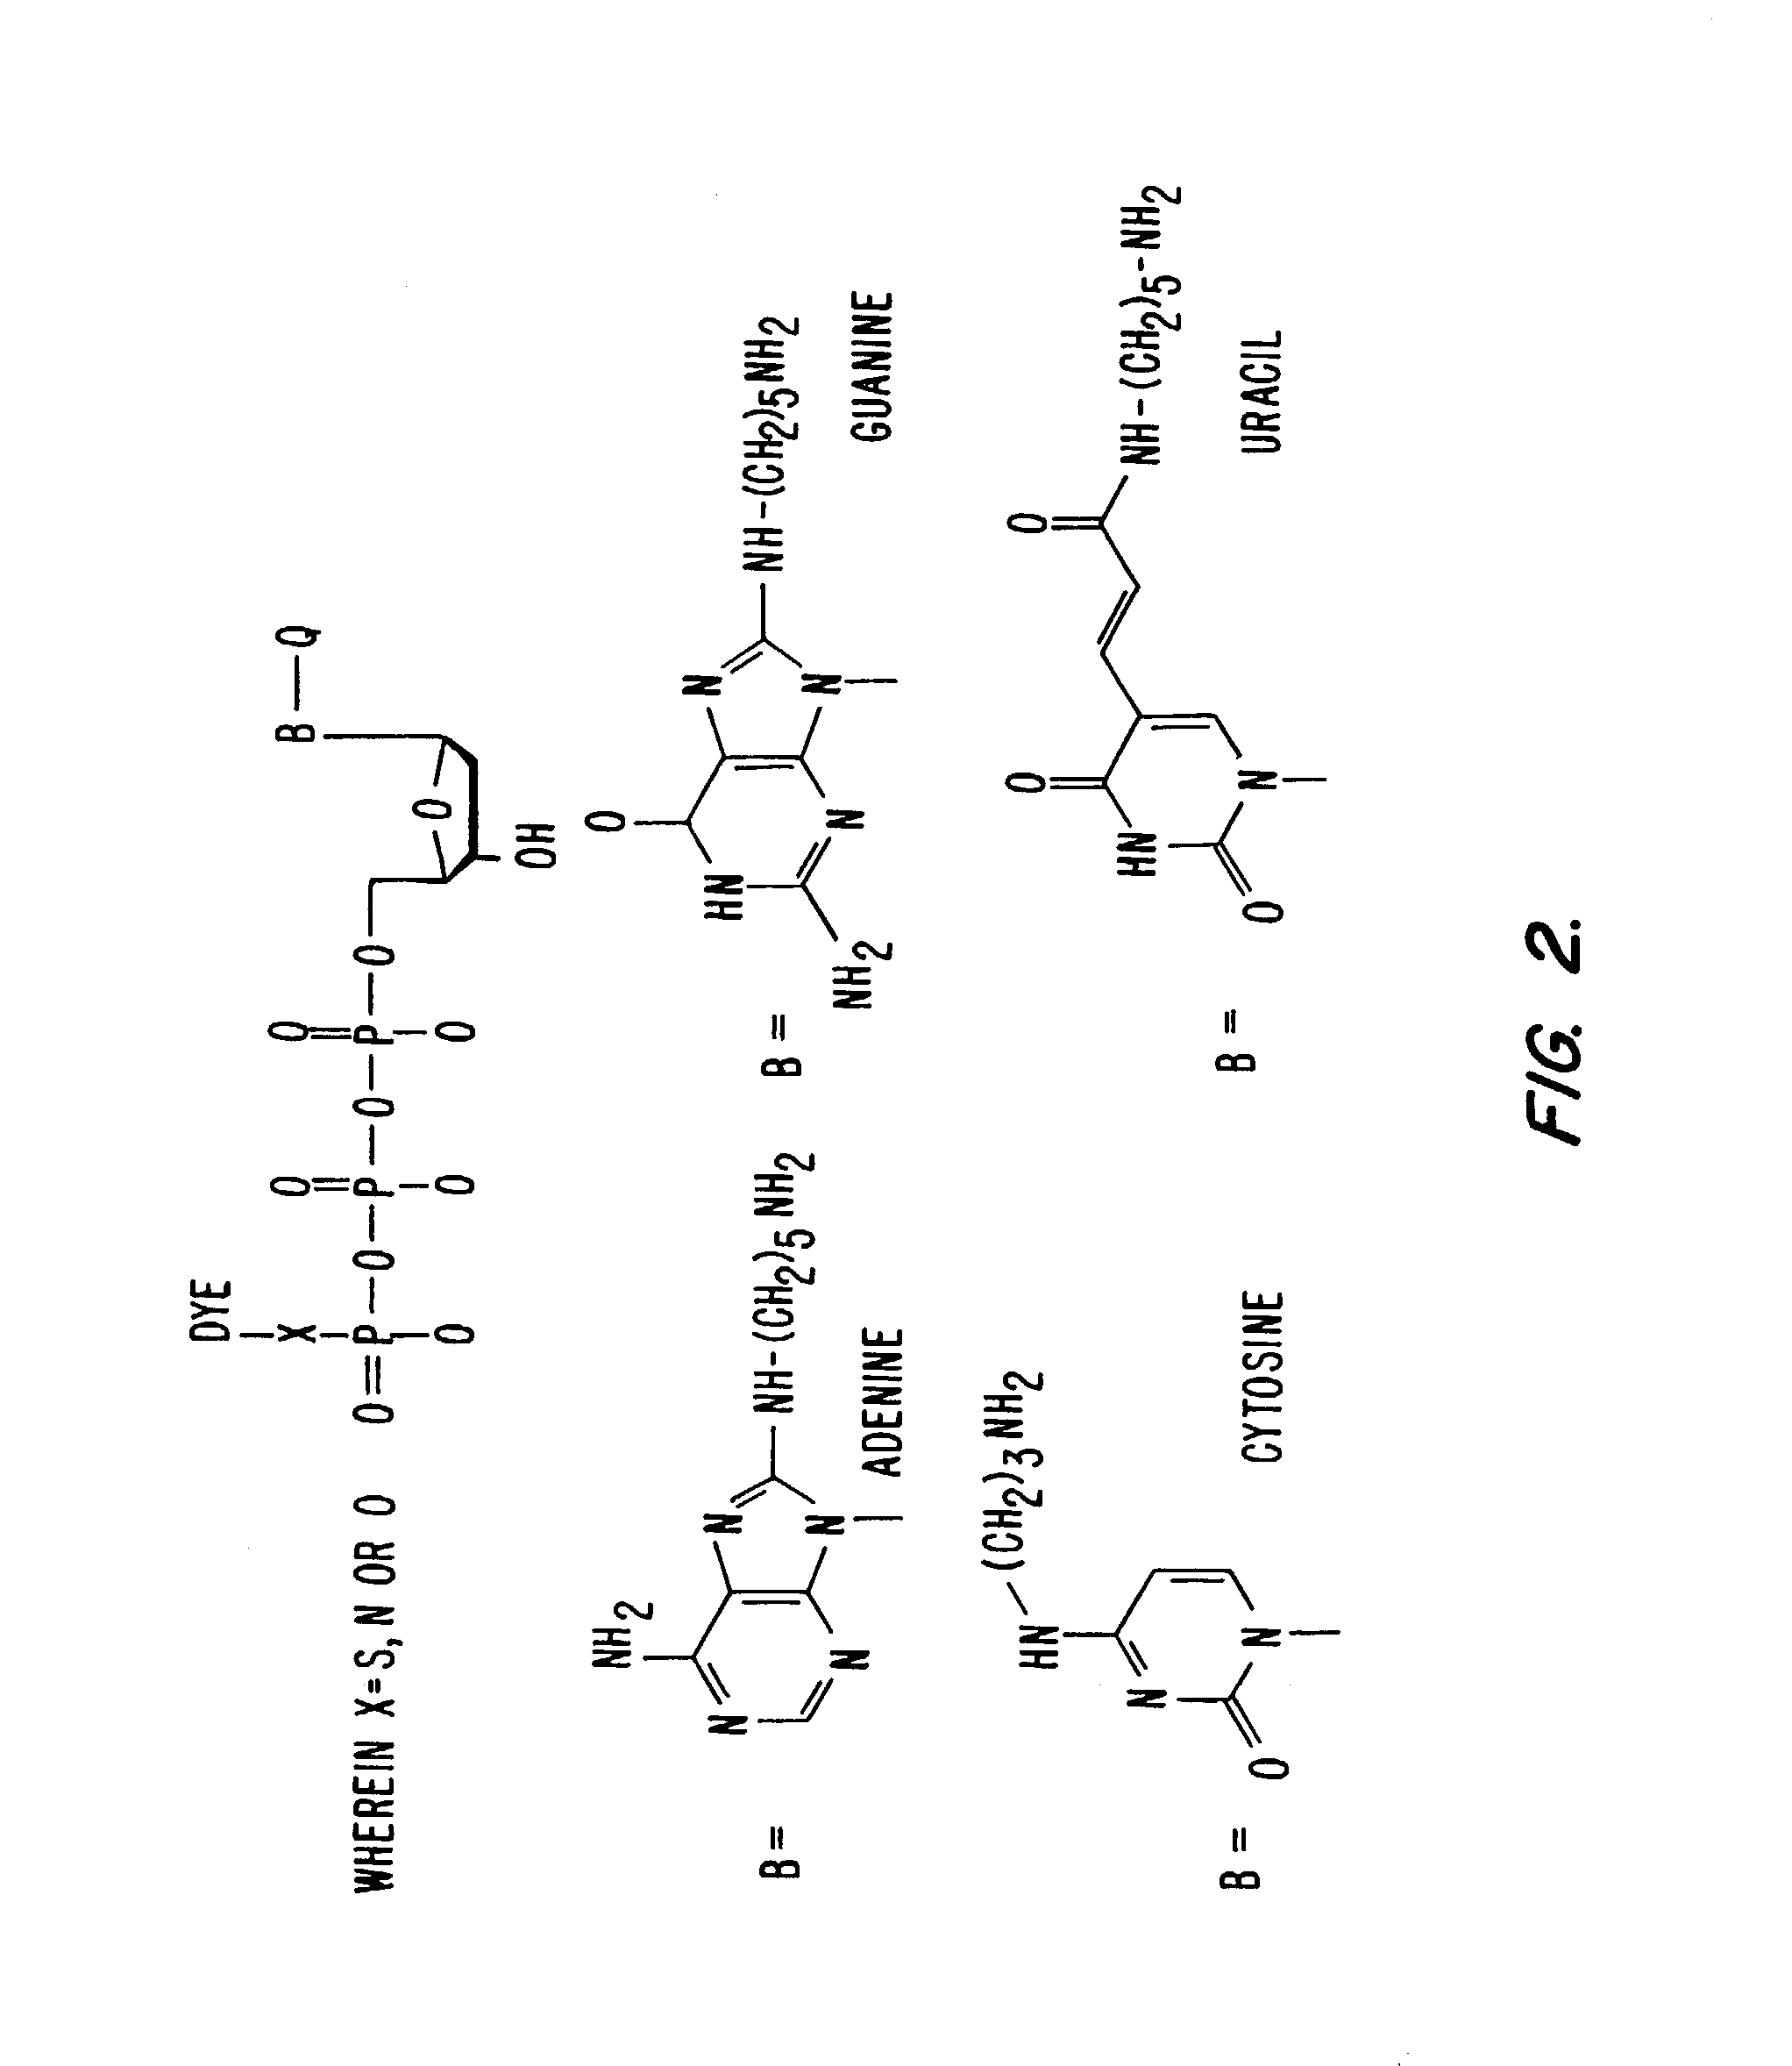 System and method for nucleic acid sequencing by polymerase synthesis